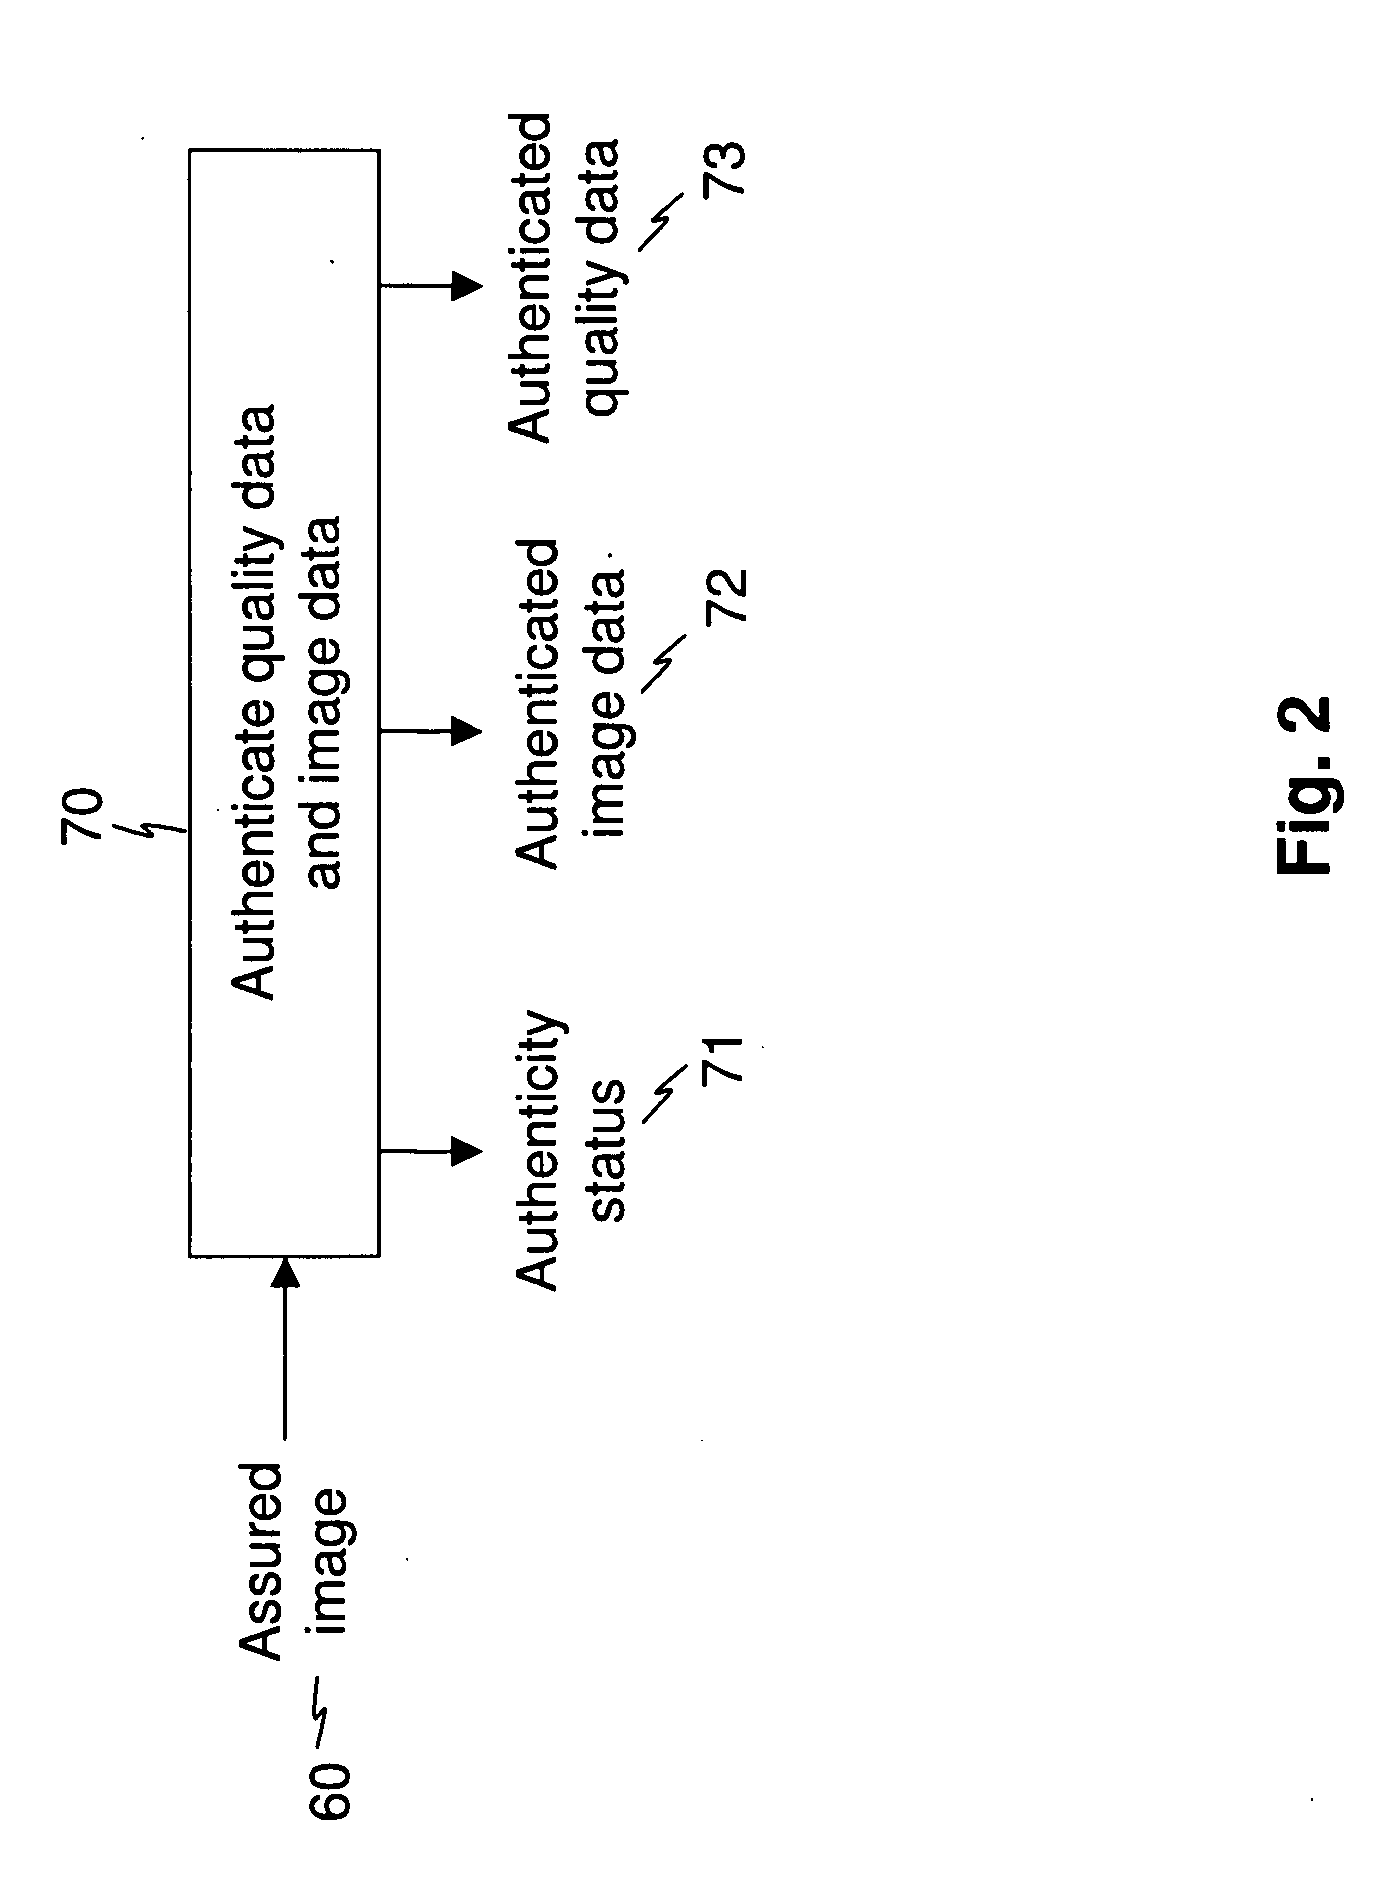 Method for image quality assessment using quality vectors